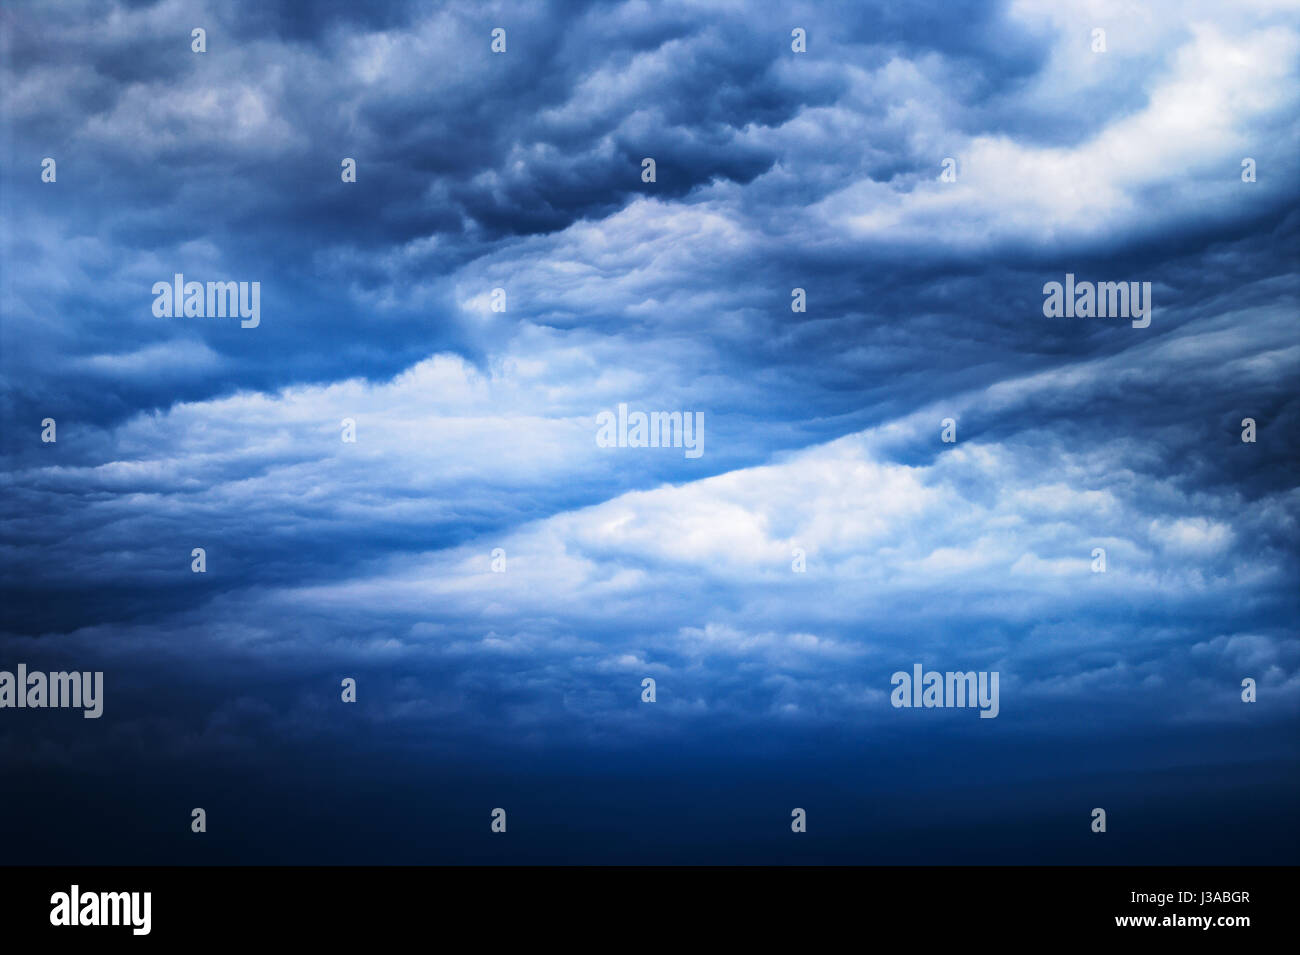 Cloudscape with dark, dramatic, stormy clouds. Nimbostratus cloud formation. Stock Photo